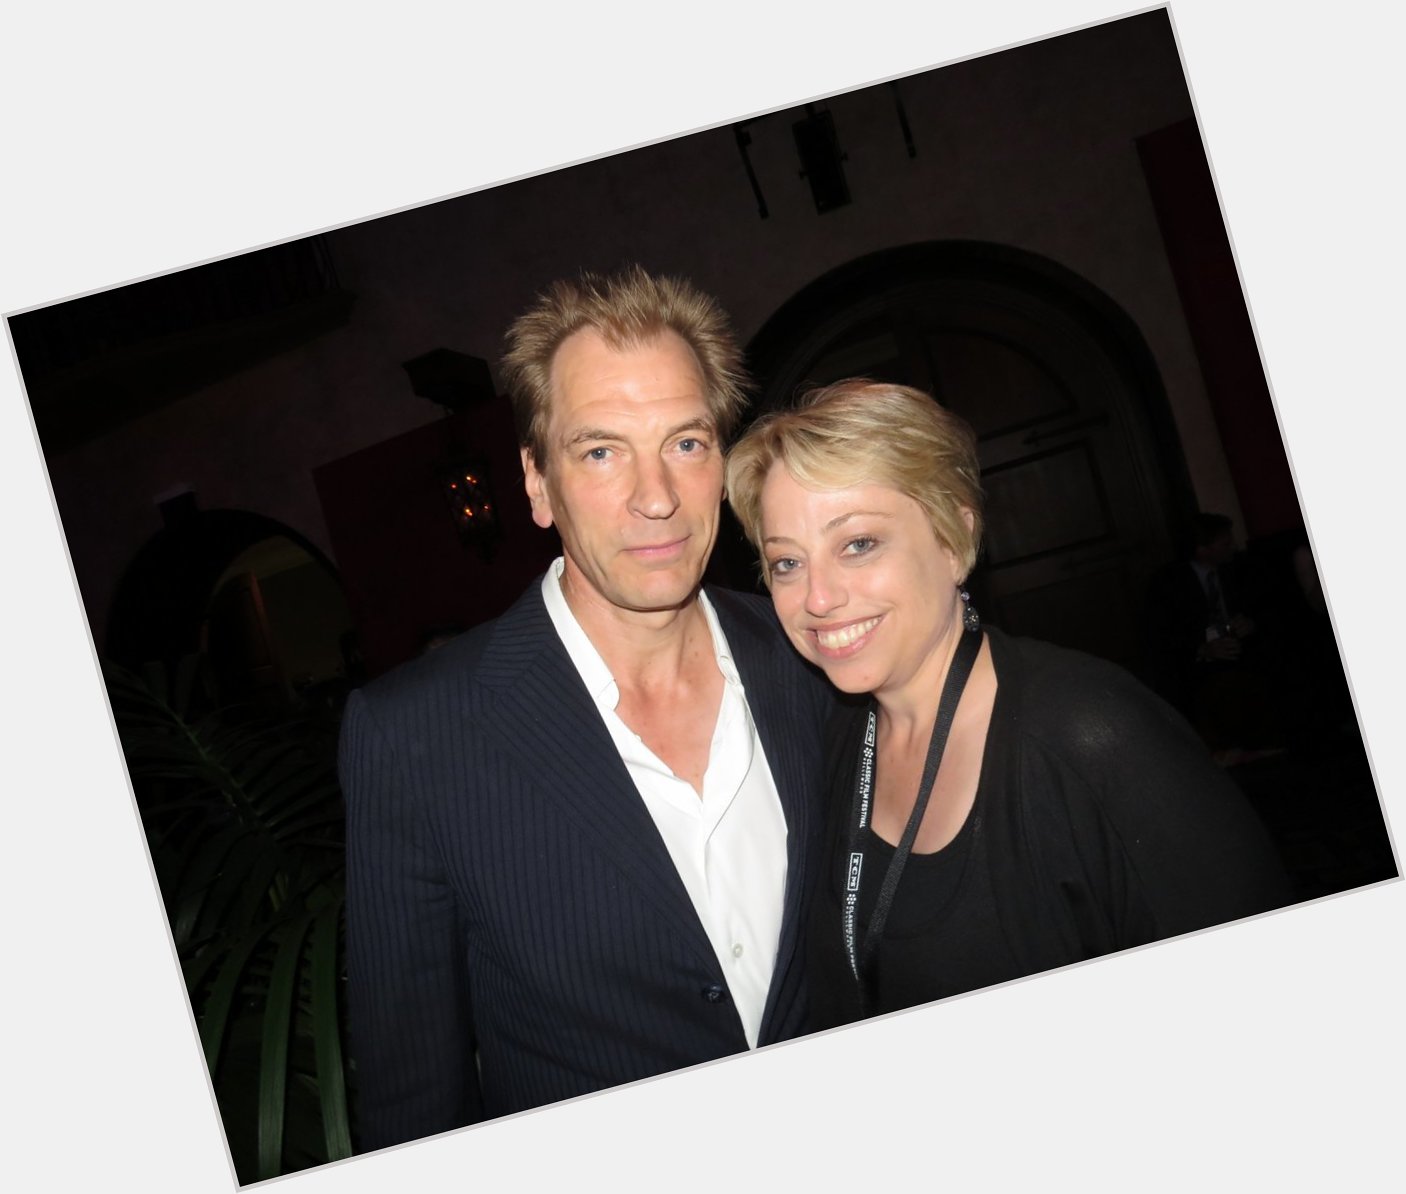 Happy birthday to Julian Sands and Jim Norton!! Both were very very kind to this fangirl. :) 